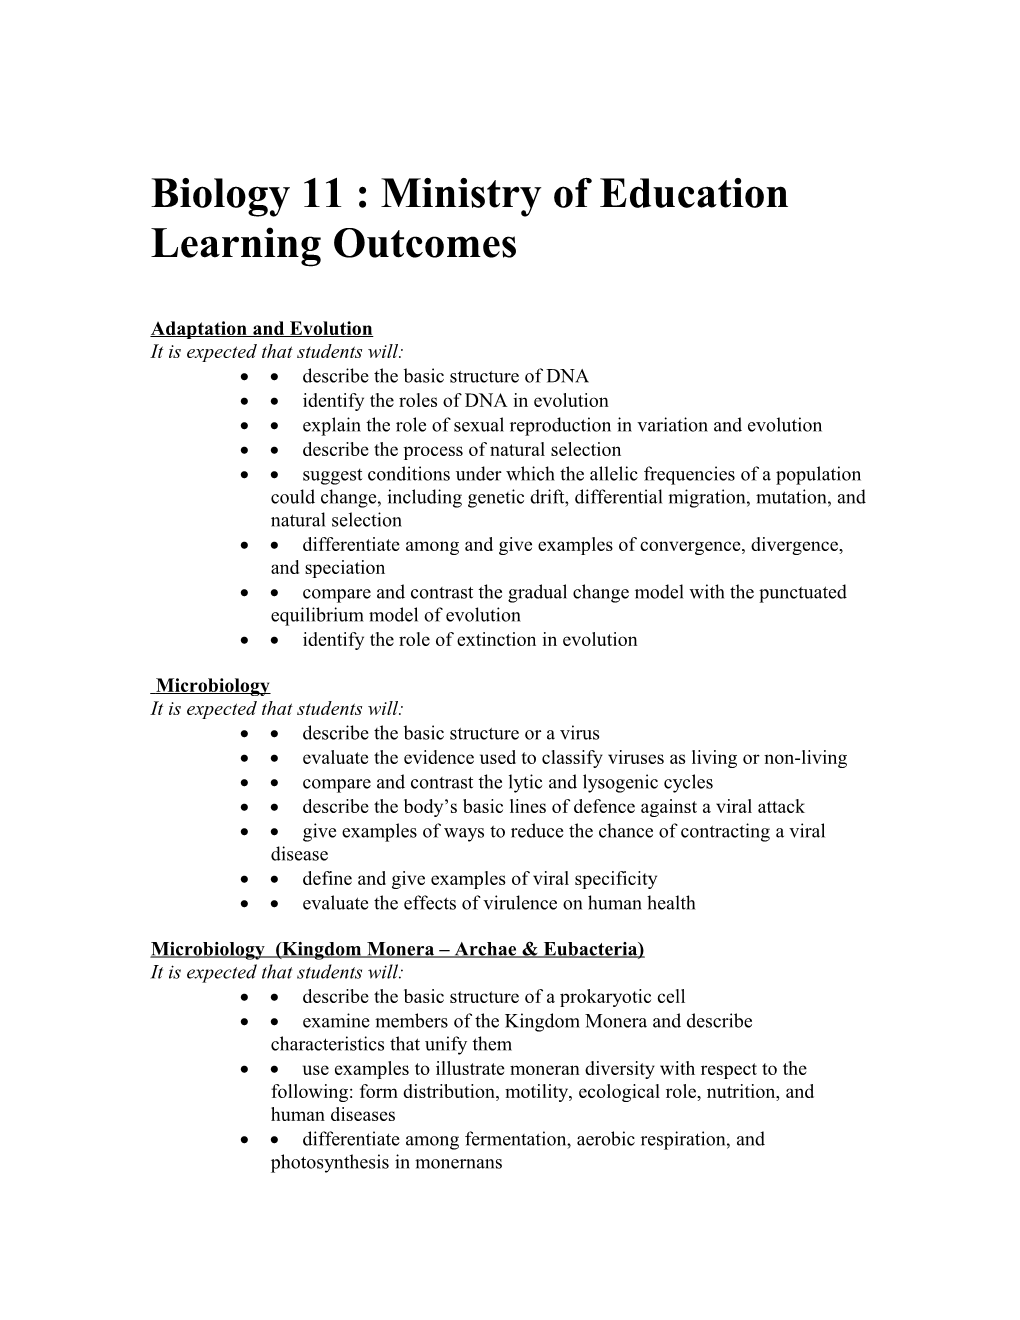 Biology 11 : Ministry of Education Learning Outcomes